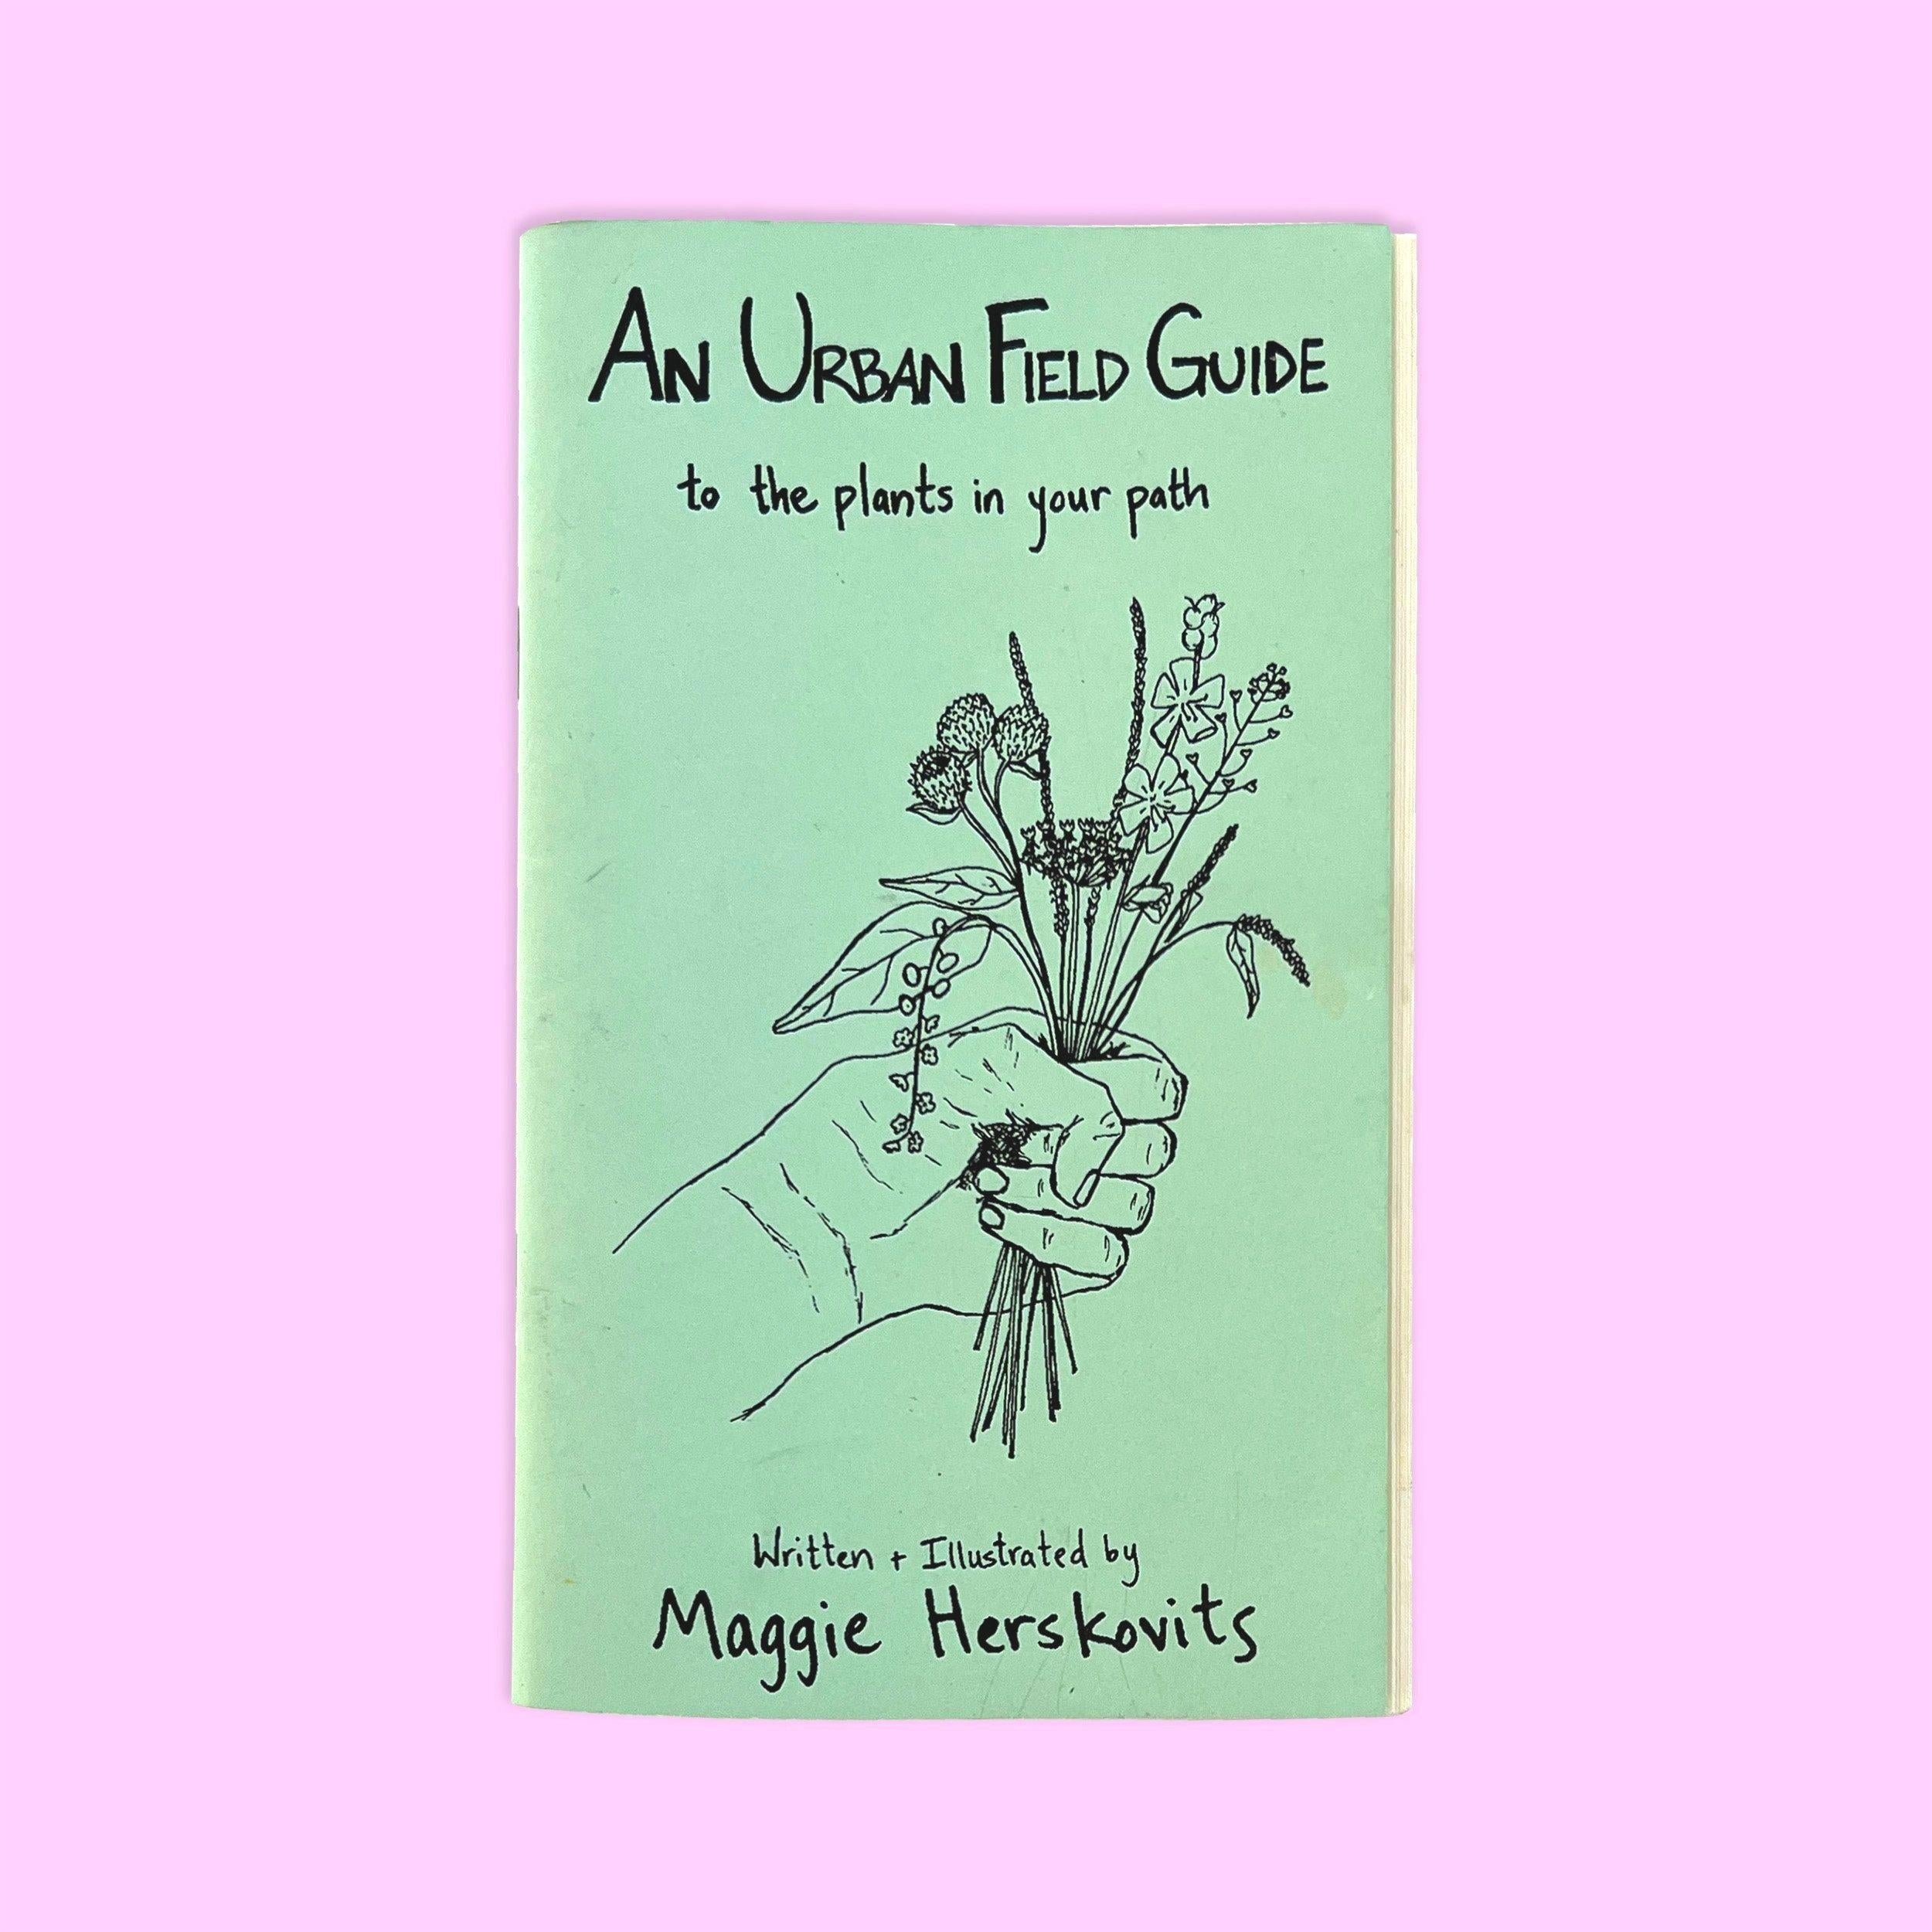 AN URBAN FIELD GUIDE TO PLANTS IN YOUR PATH BY MAGGIE HERSKOVITS